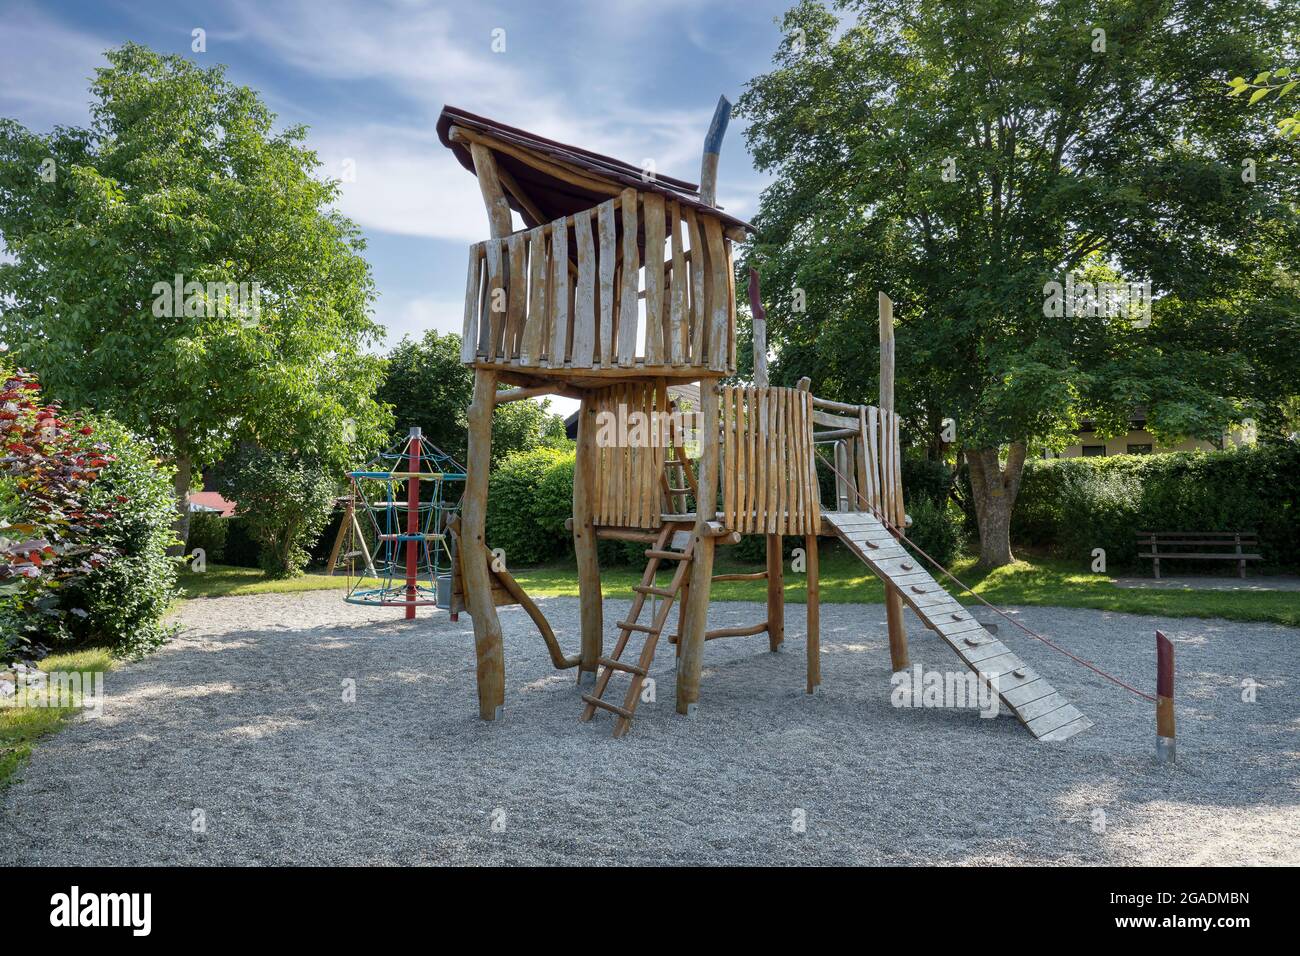 Playhouse made of wood on a children's playground in a small park Stock Photo